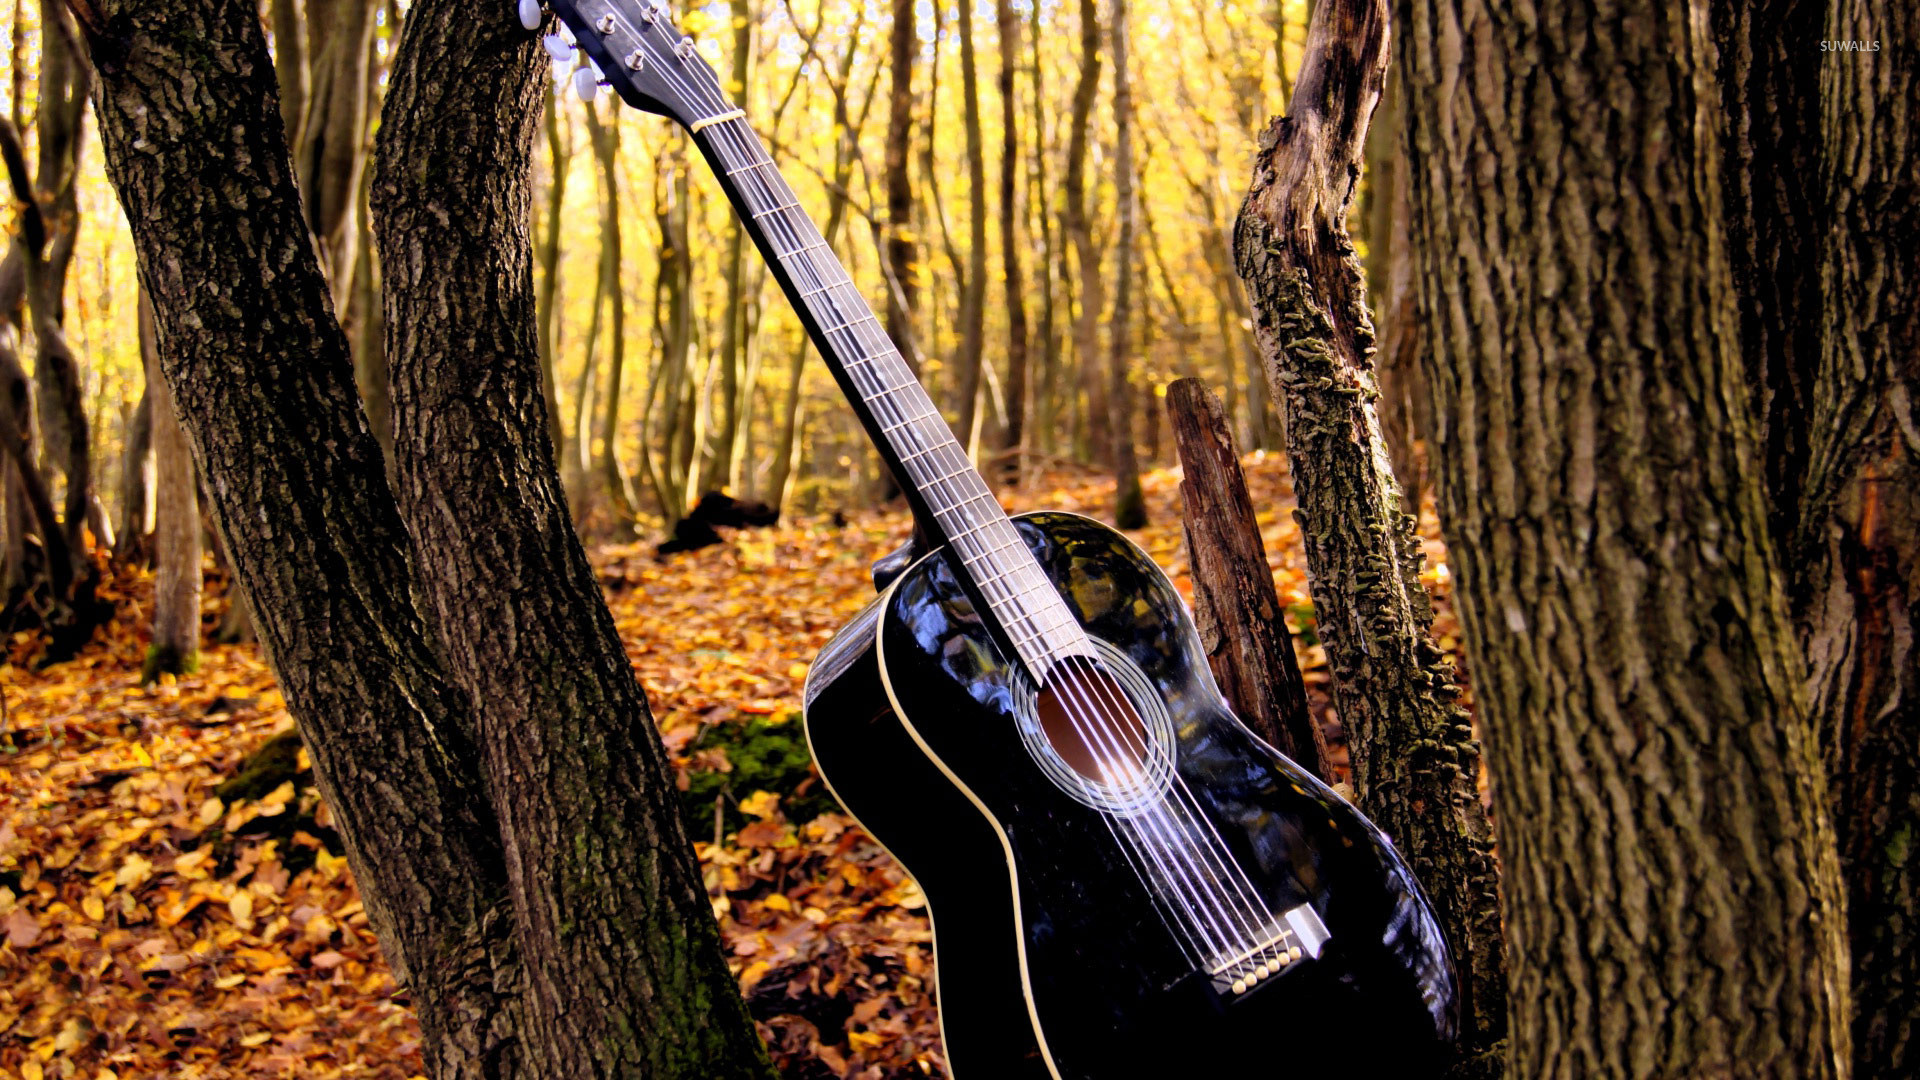 1920x1080 Cool Country Guitar Wallpaper In The Forest Pictures